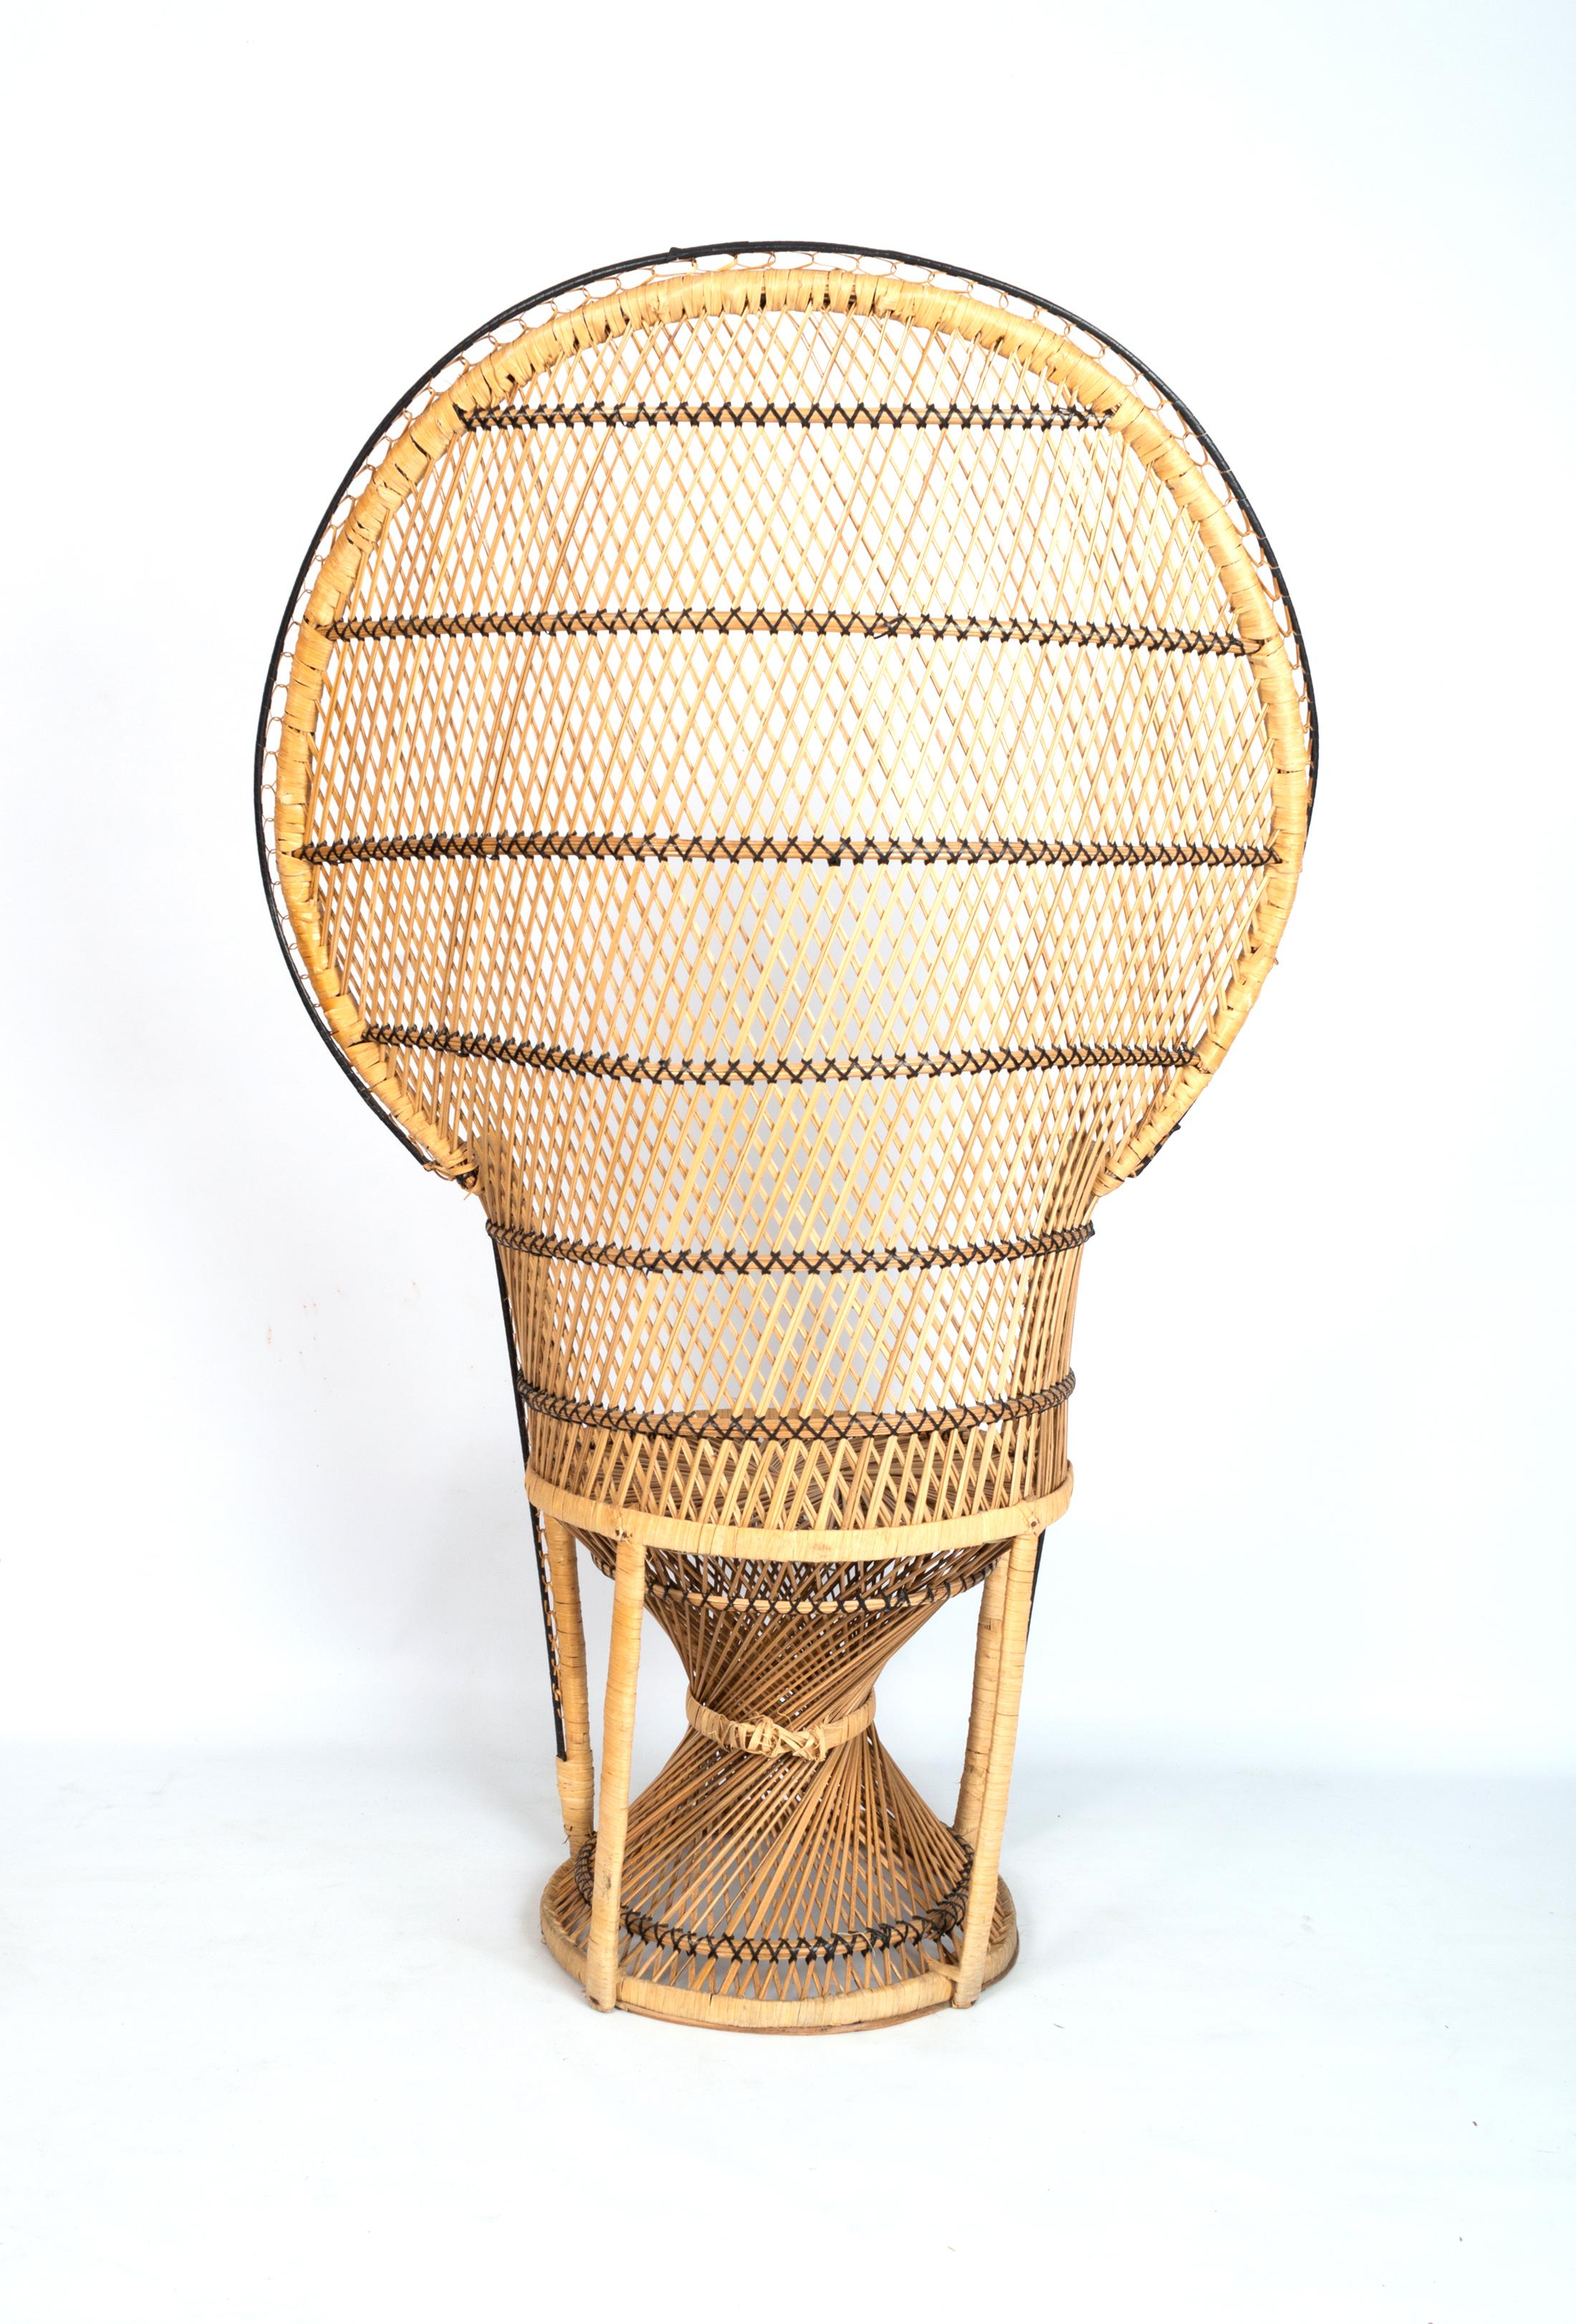 Mid Century Emmanuel Peacock Wicker Rattan Chair. C.1960 Italy In Good Condition For Sale In London, GB